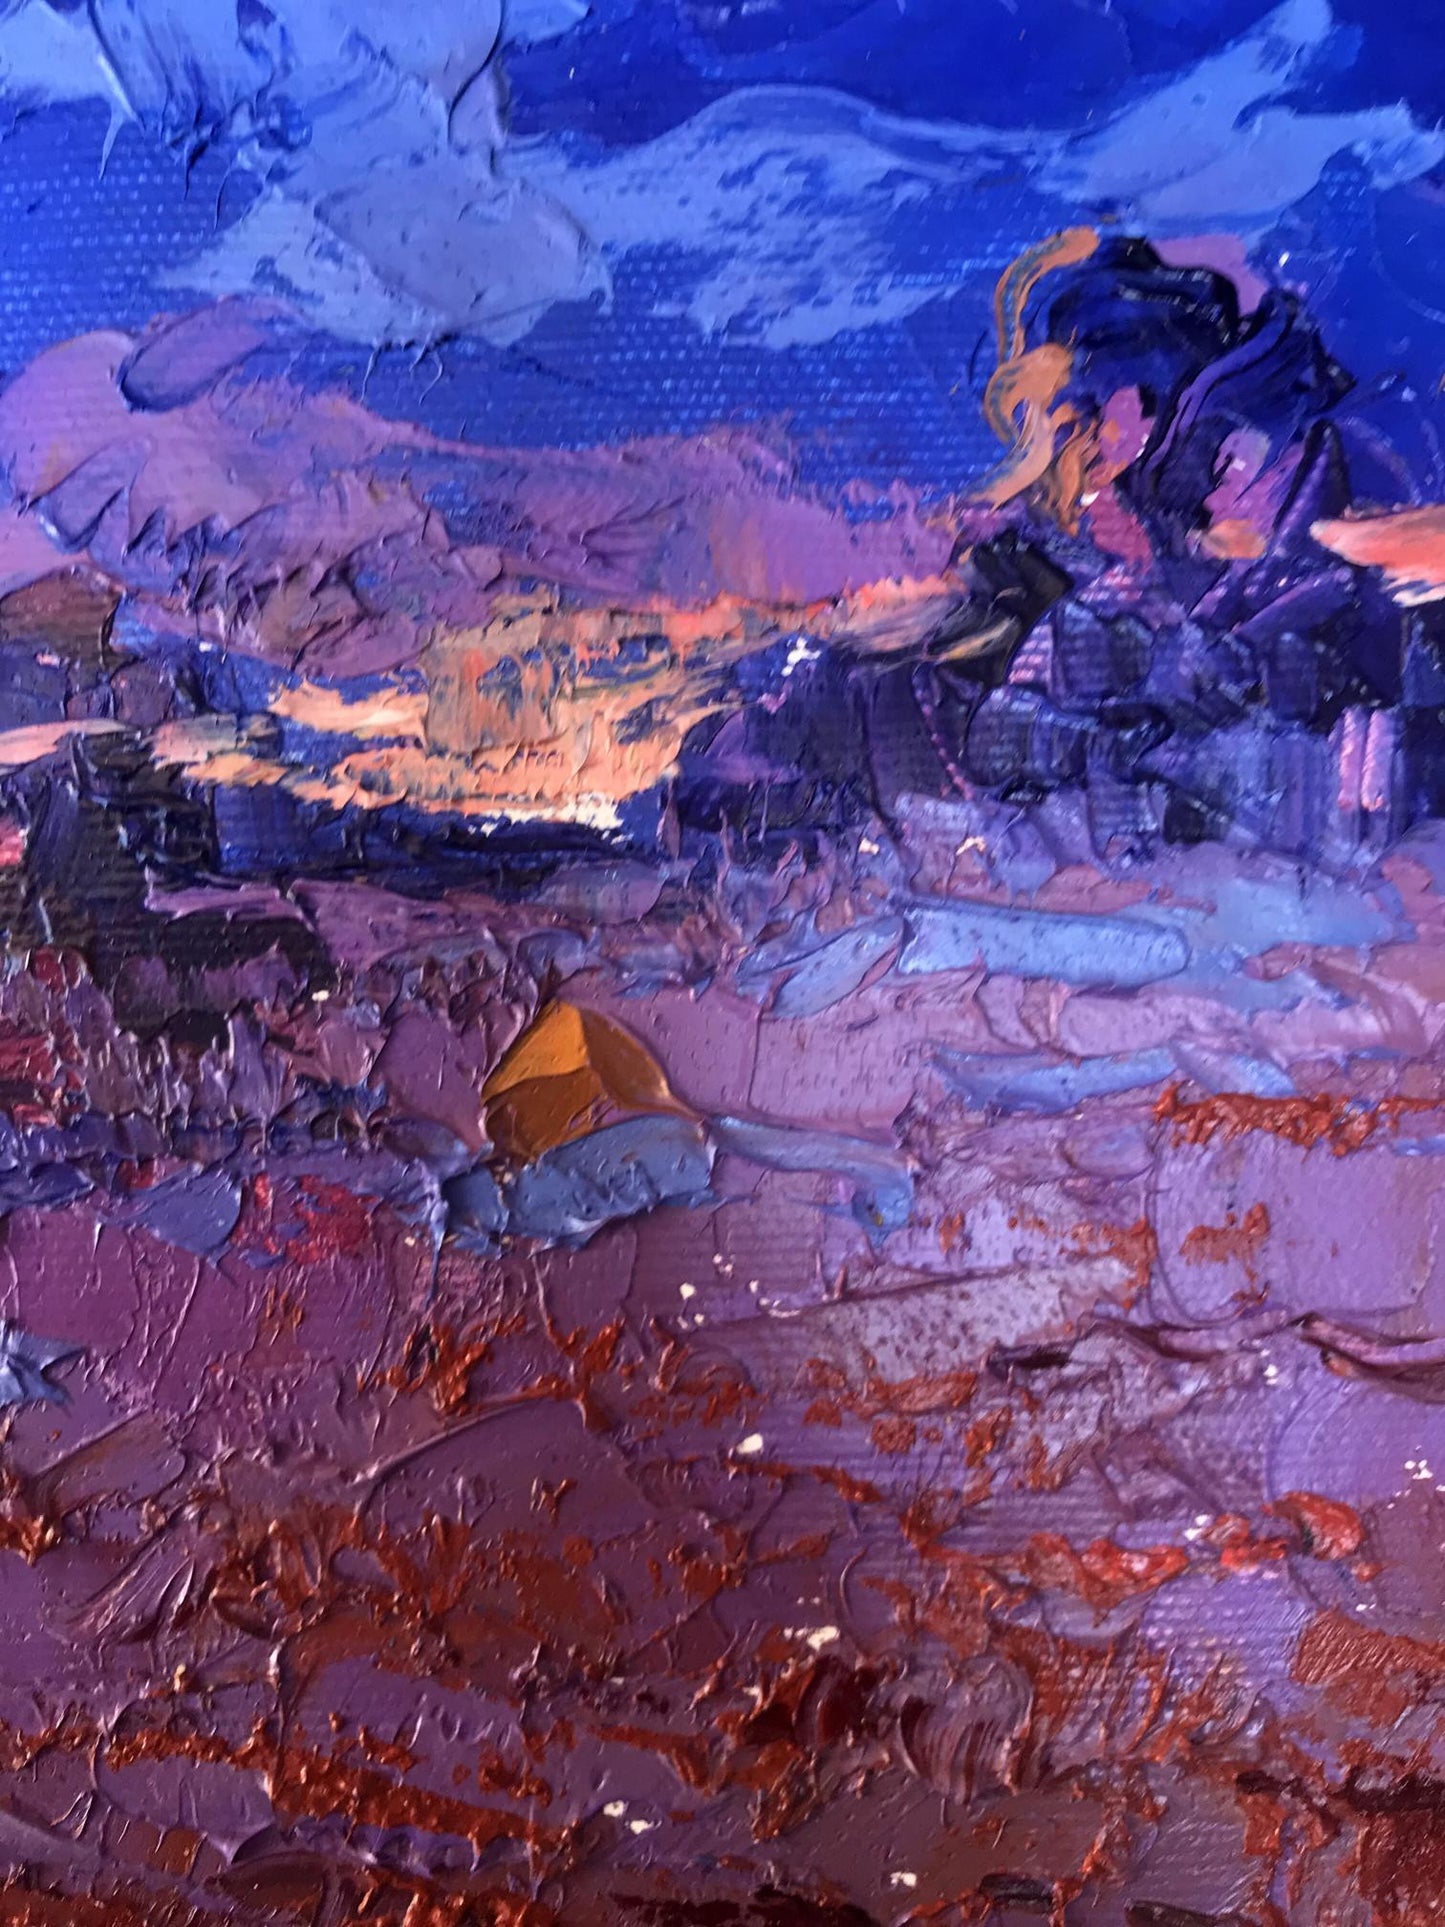 Oil artwork capturing the chill of the evening by Alex Ivanyuk